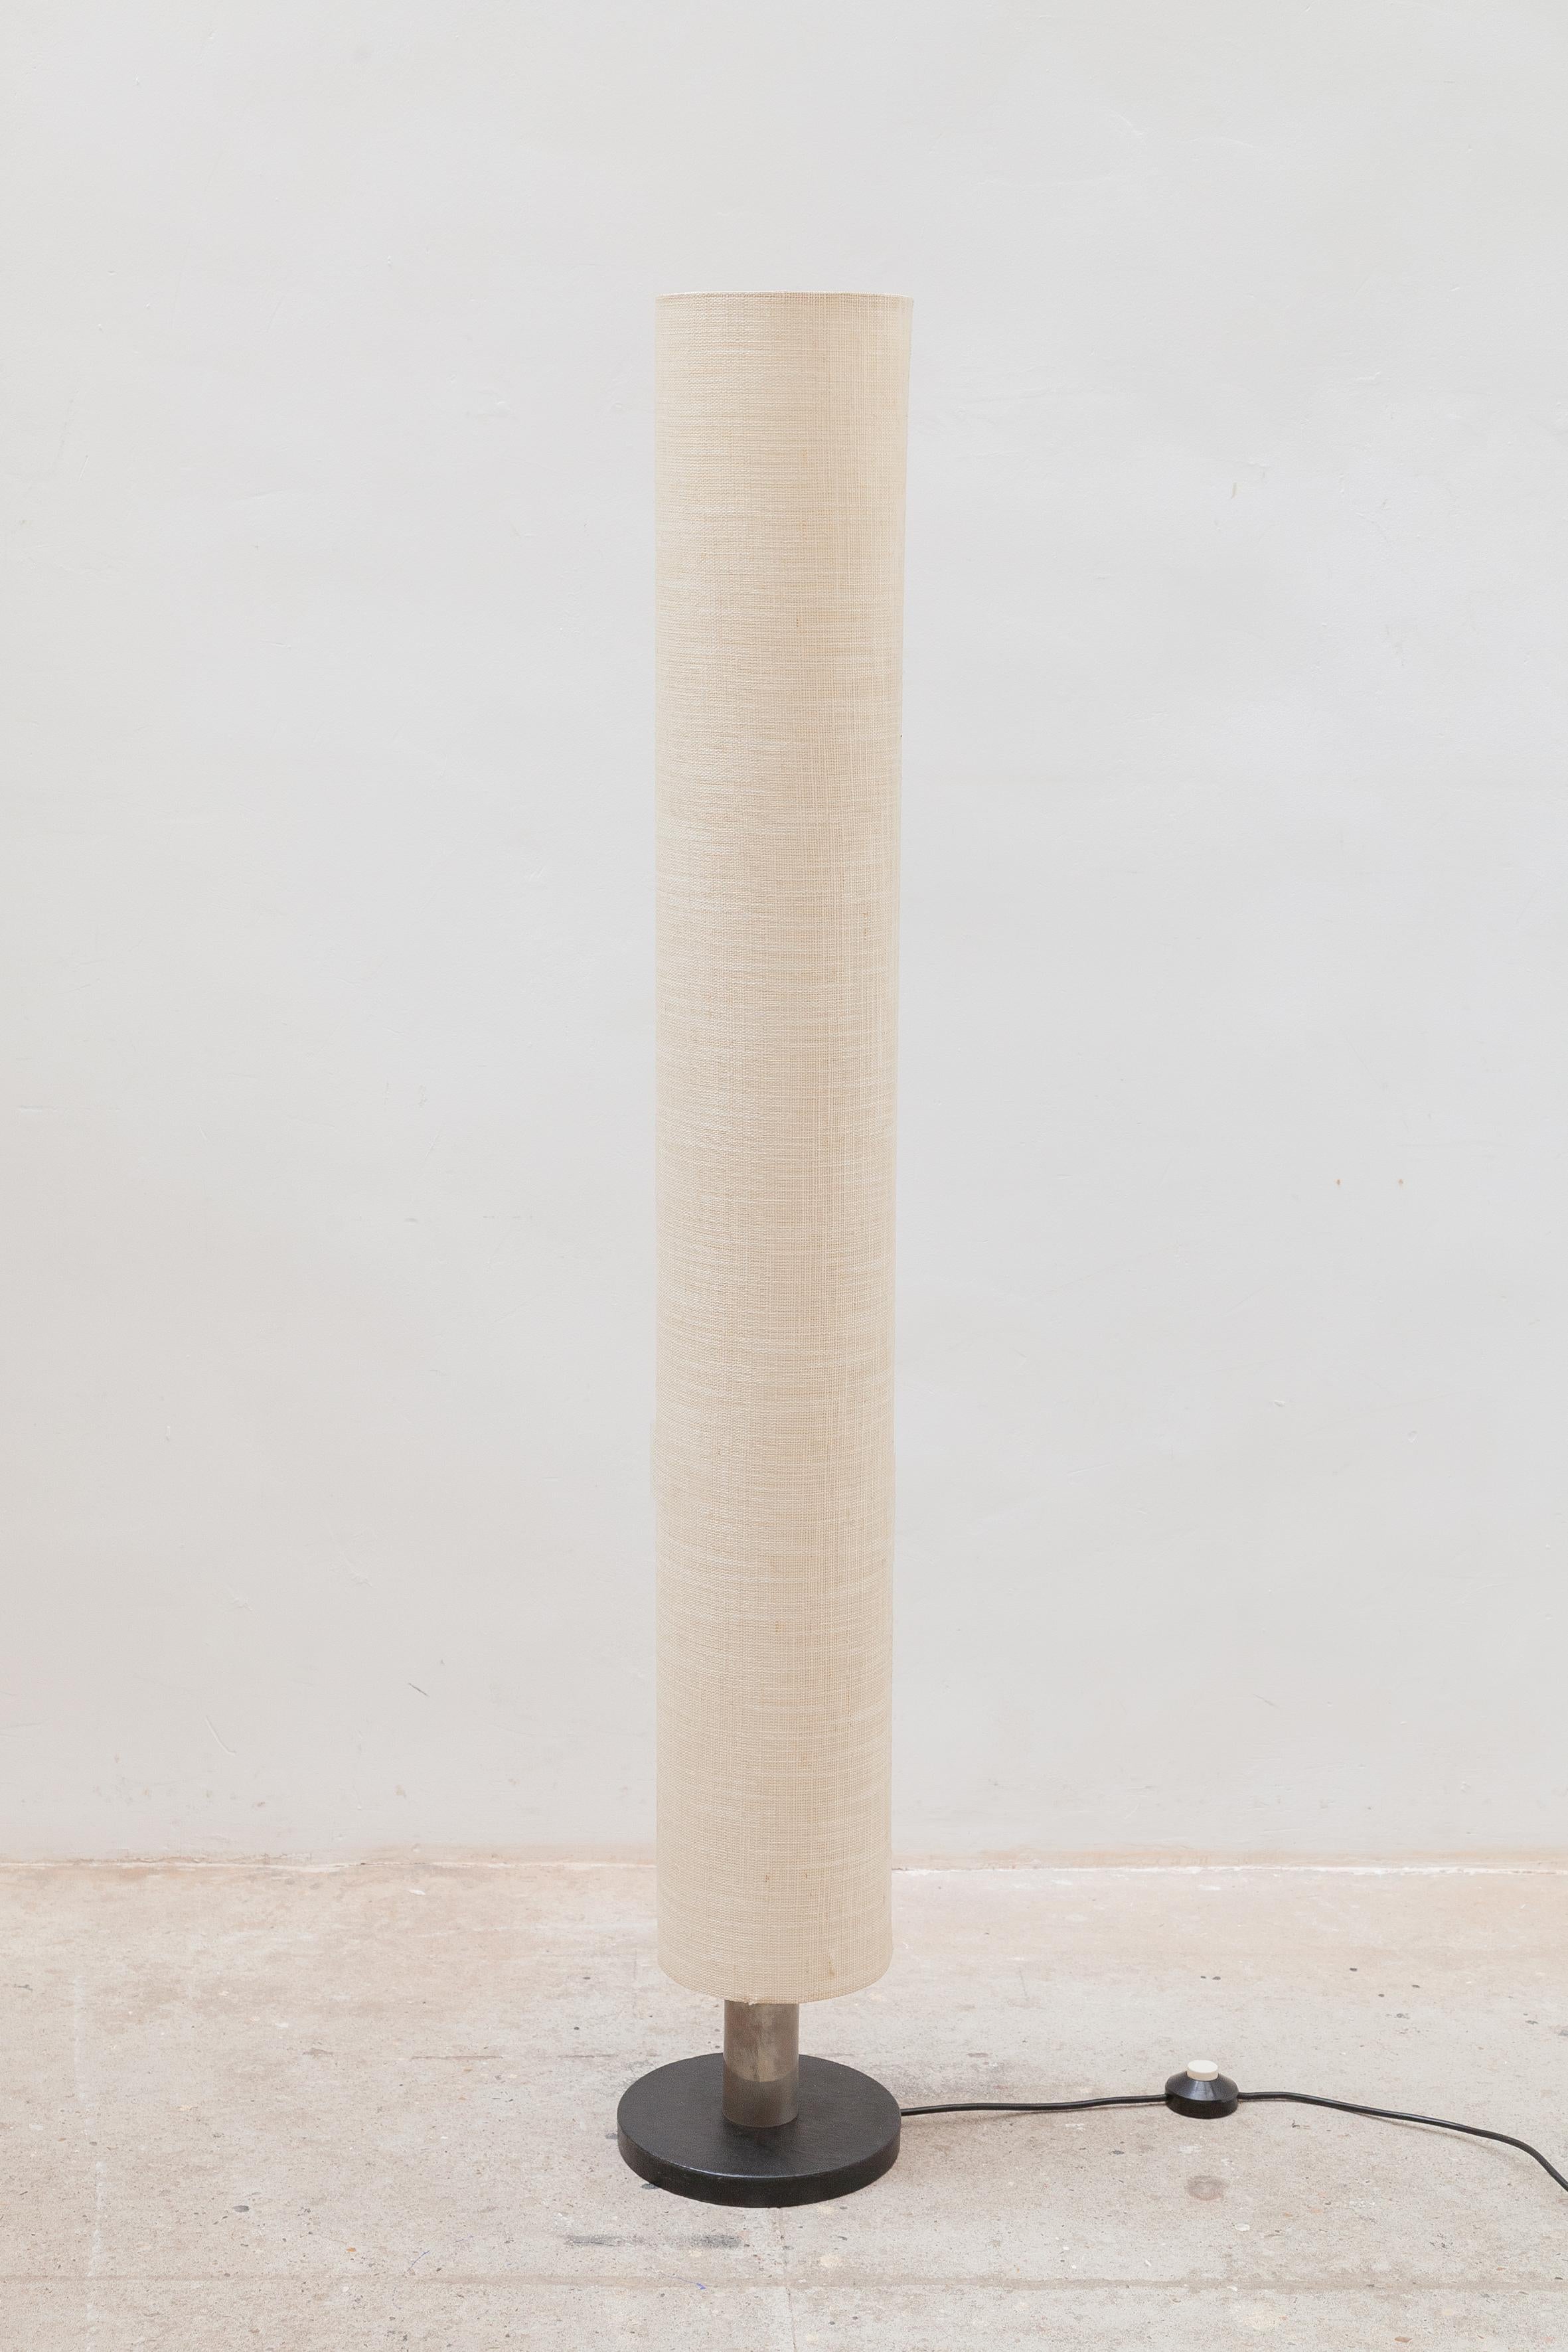 Modern 1960's floor lamp equipped with a tube designed shade in linen gives a soft light and beautiful accent to your interior.
In Original good condition. Also available in a set of two.